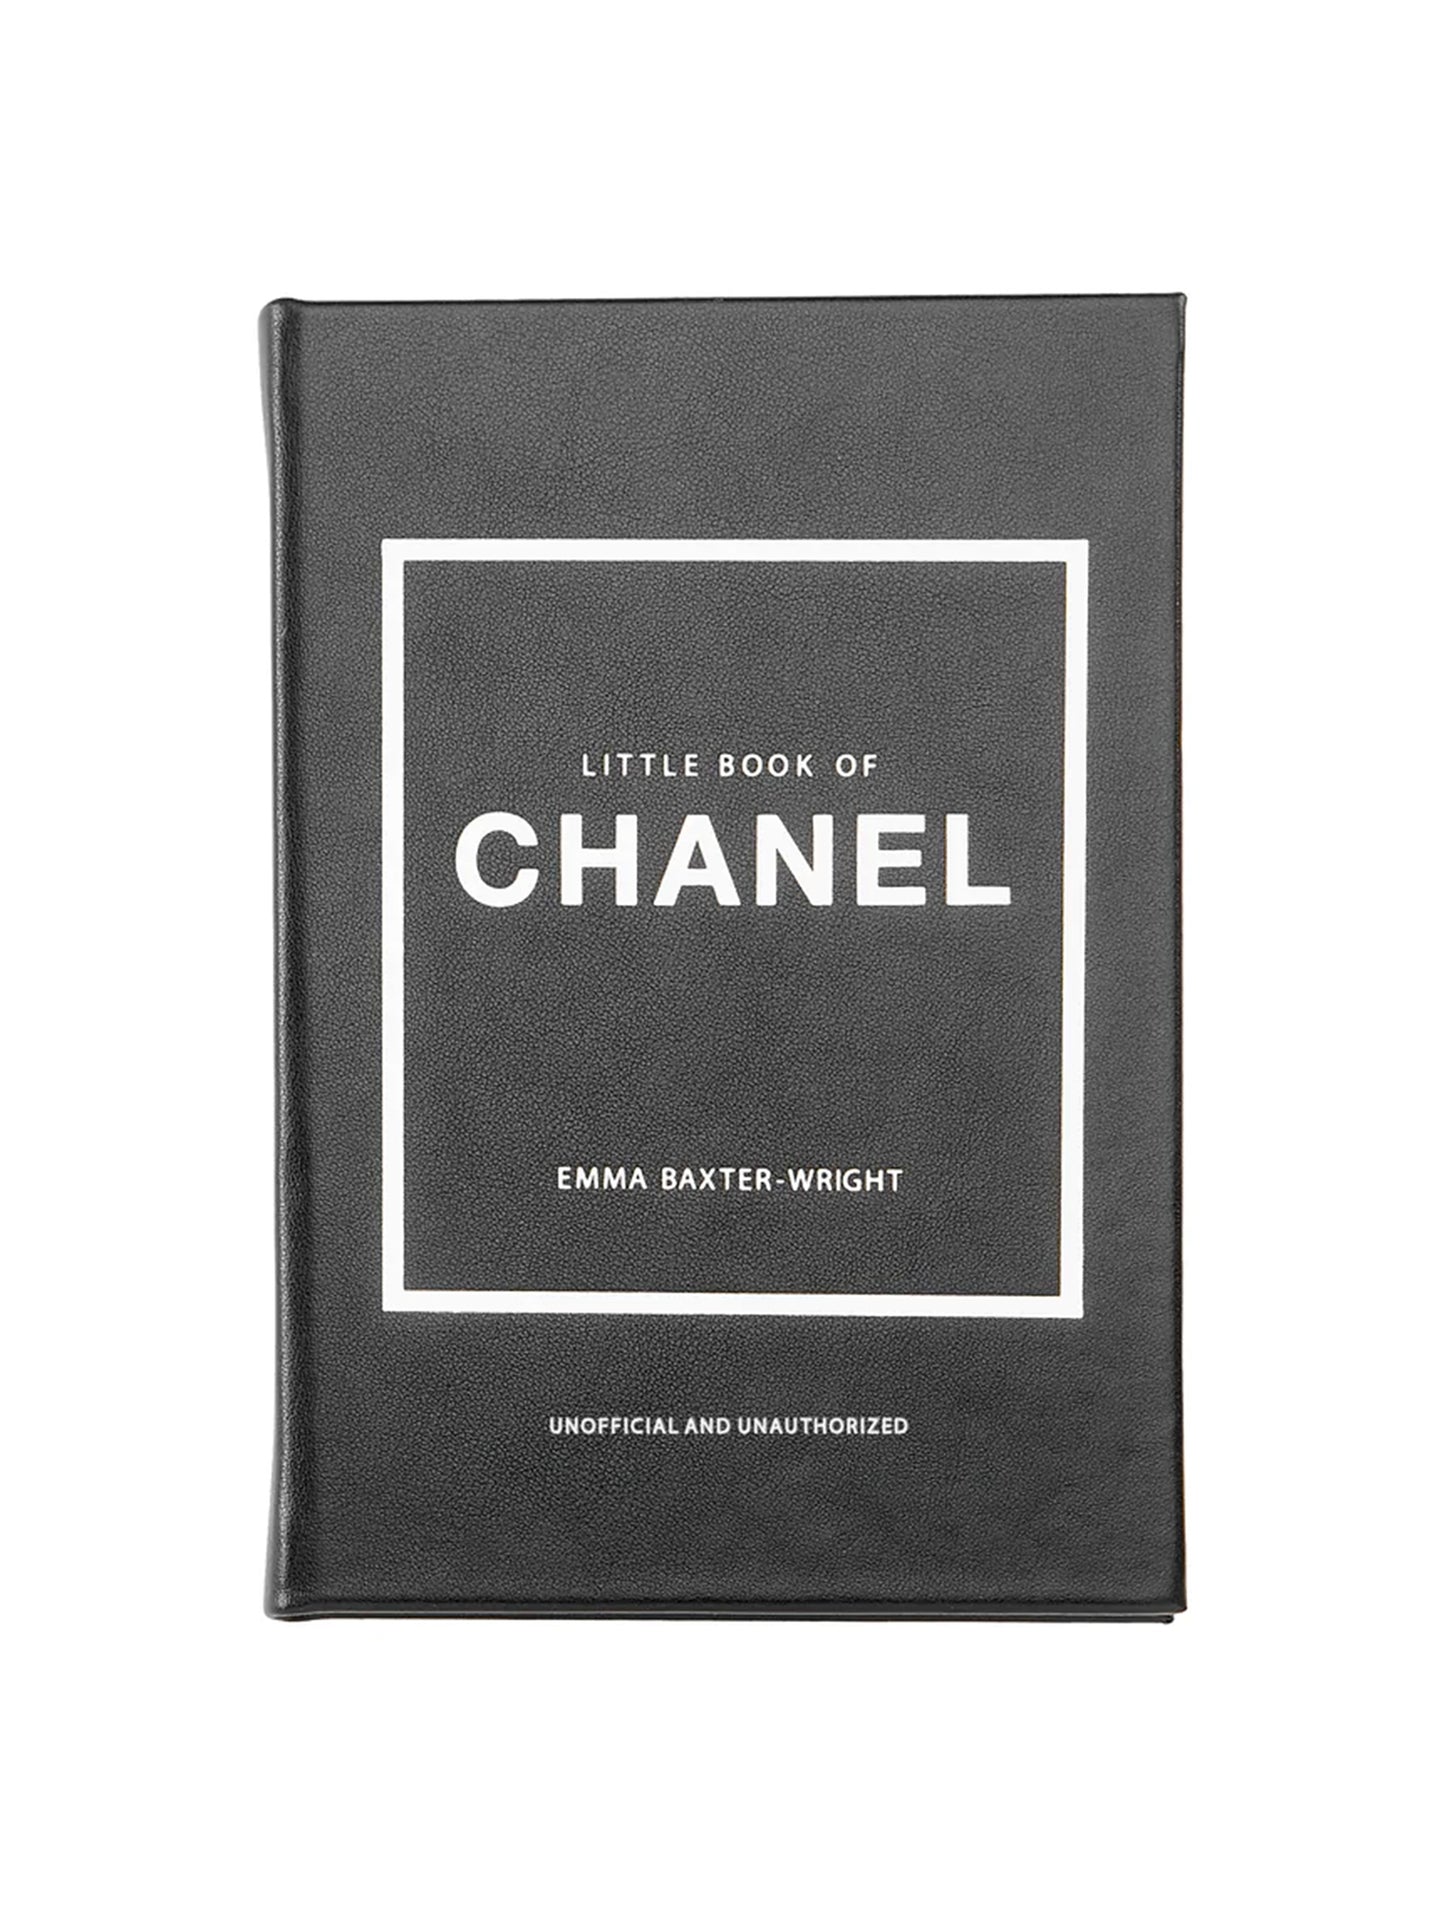 Little Book Of Chanel Leather Bound Edition Weston Table